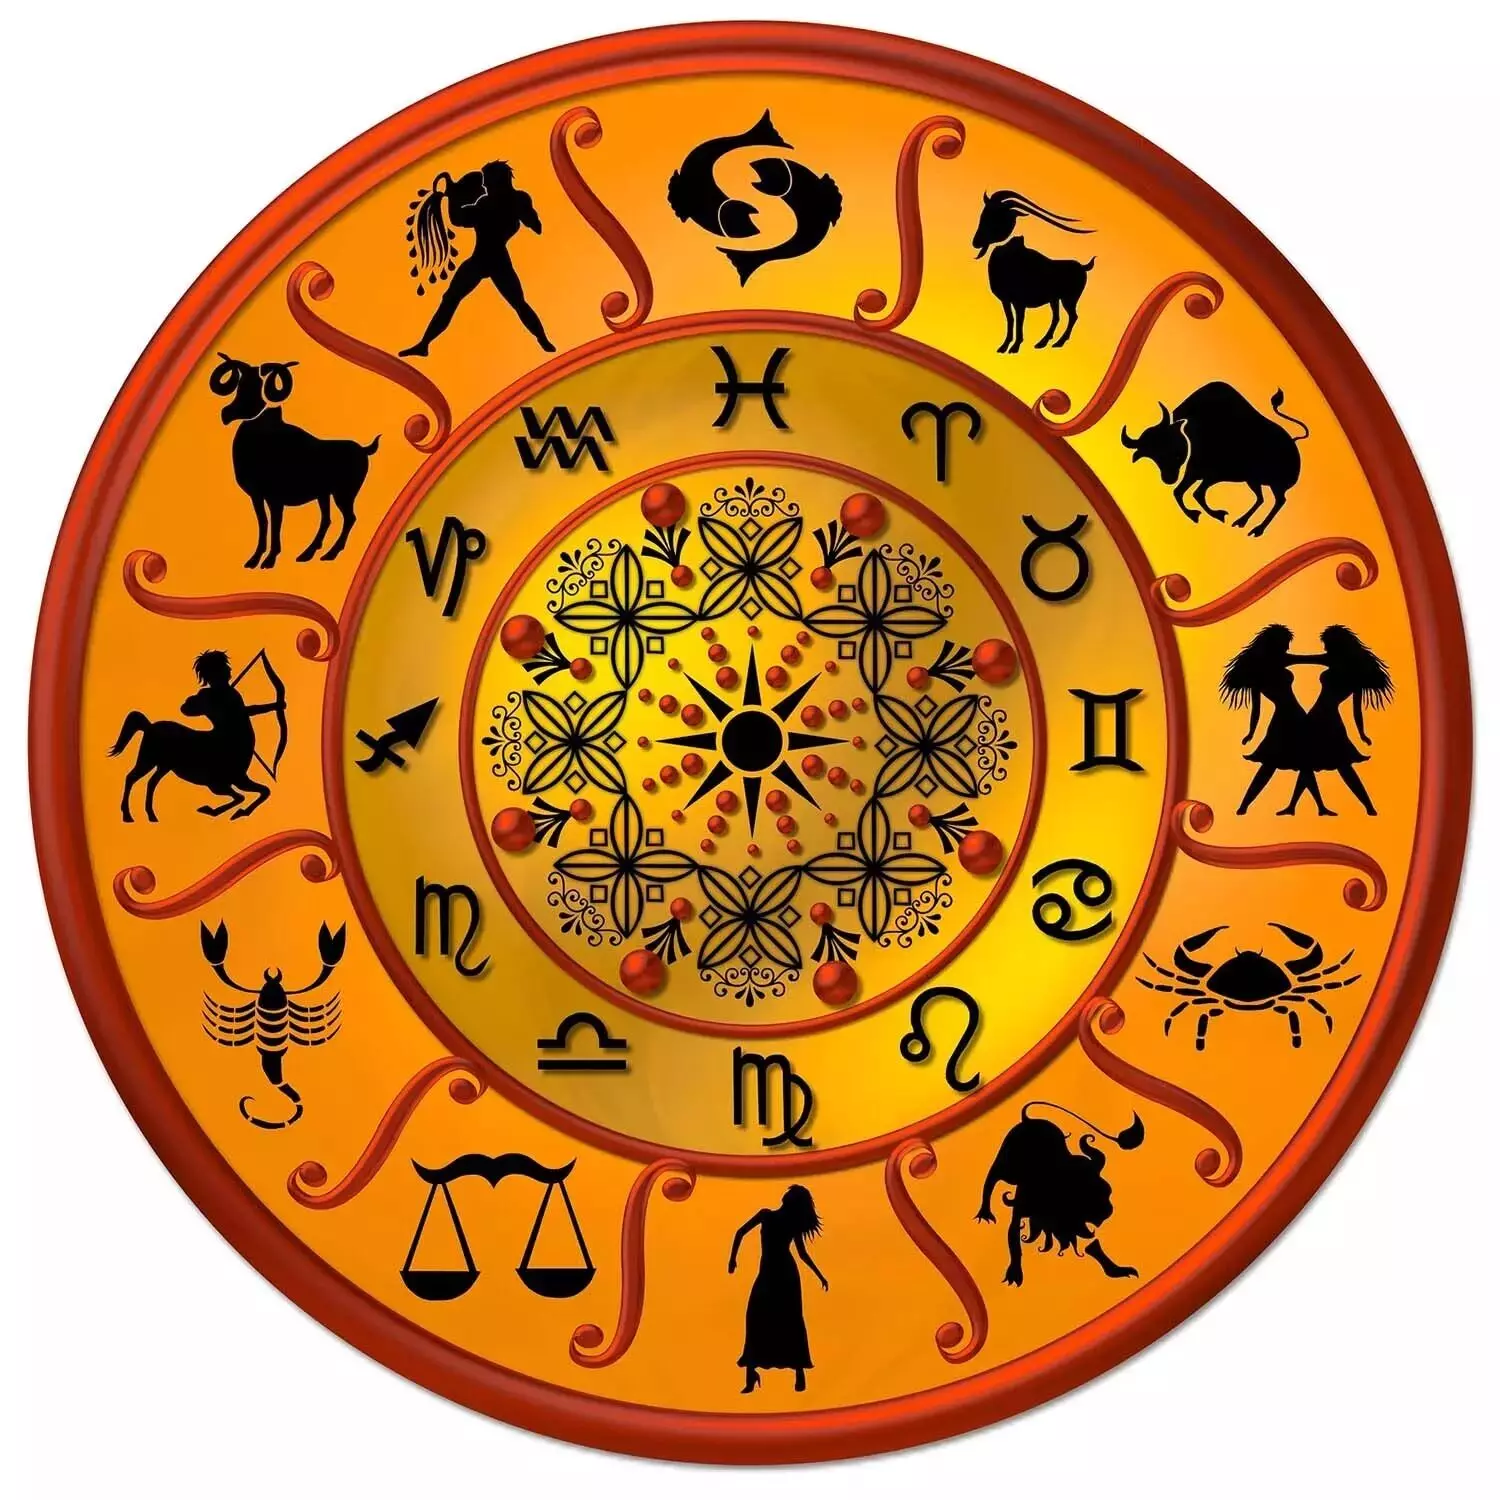 04 December   – Know your todays horoscope